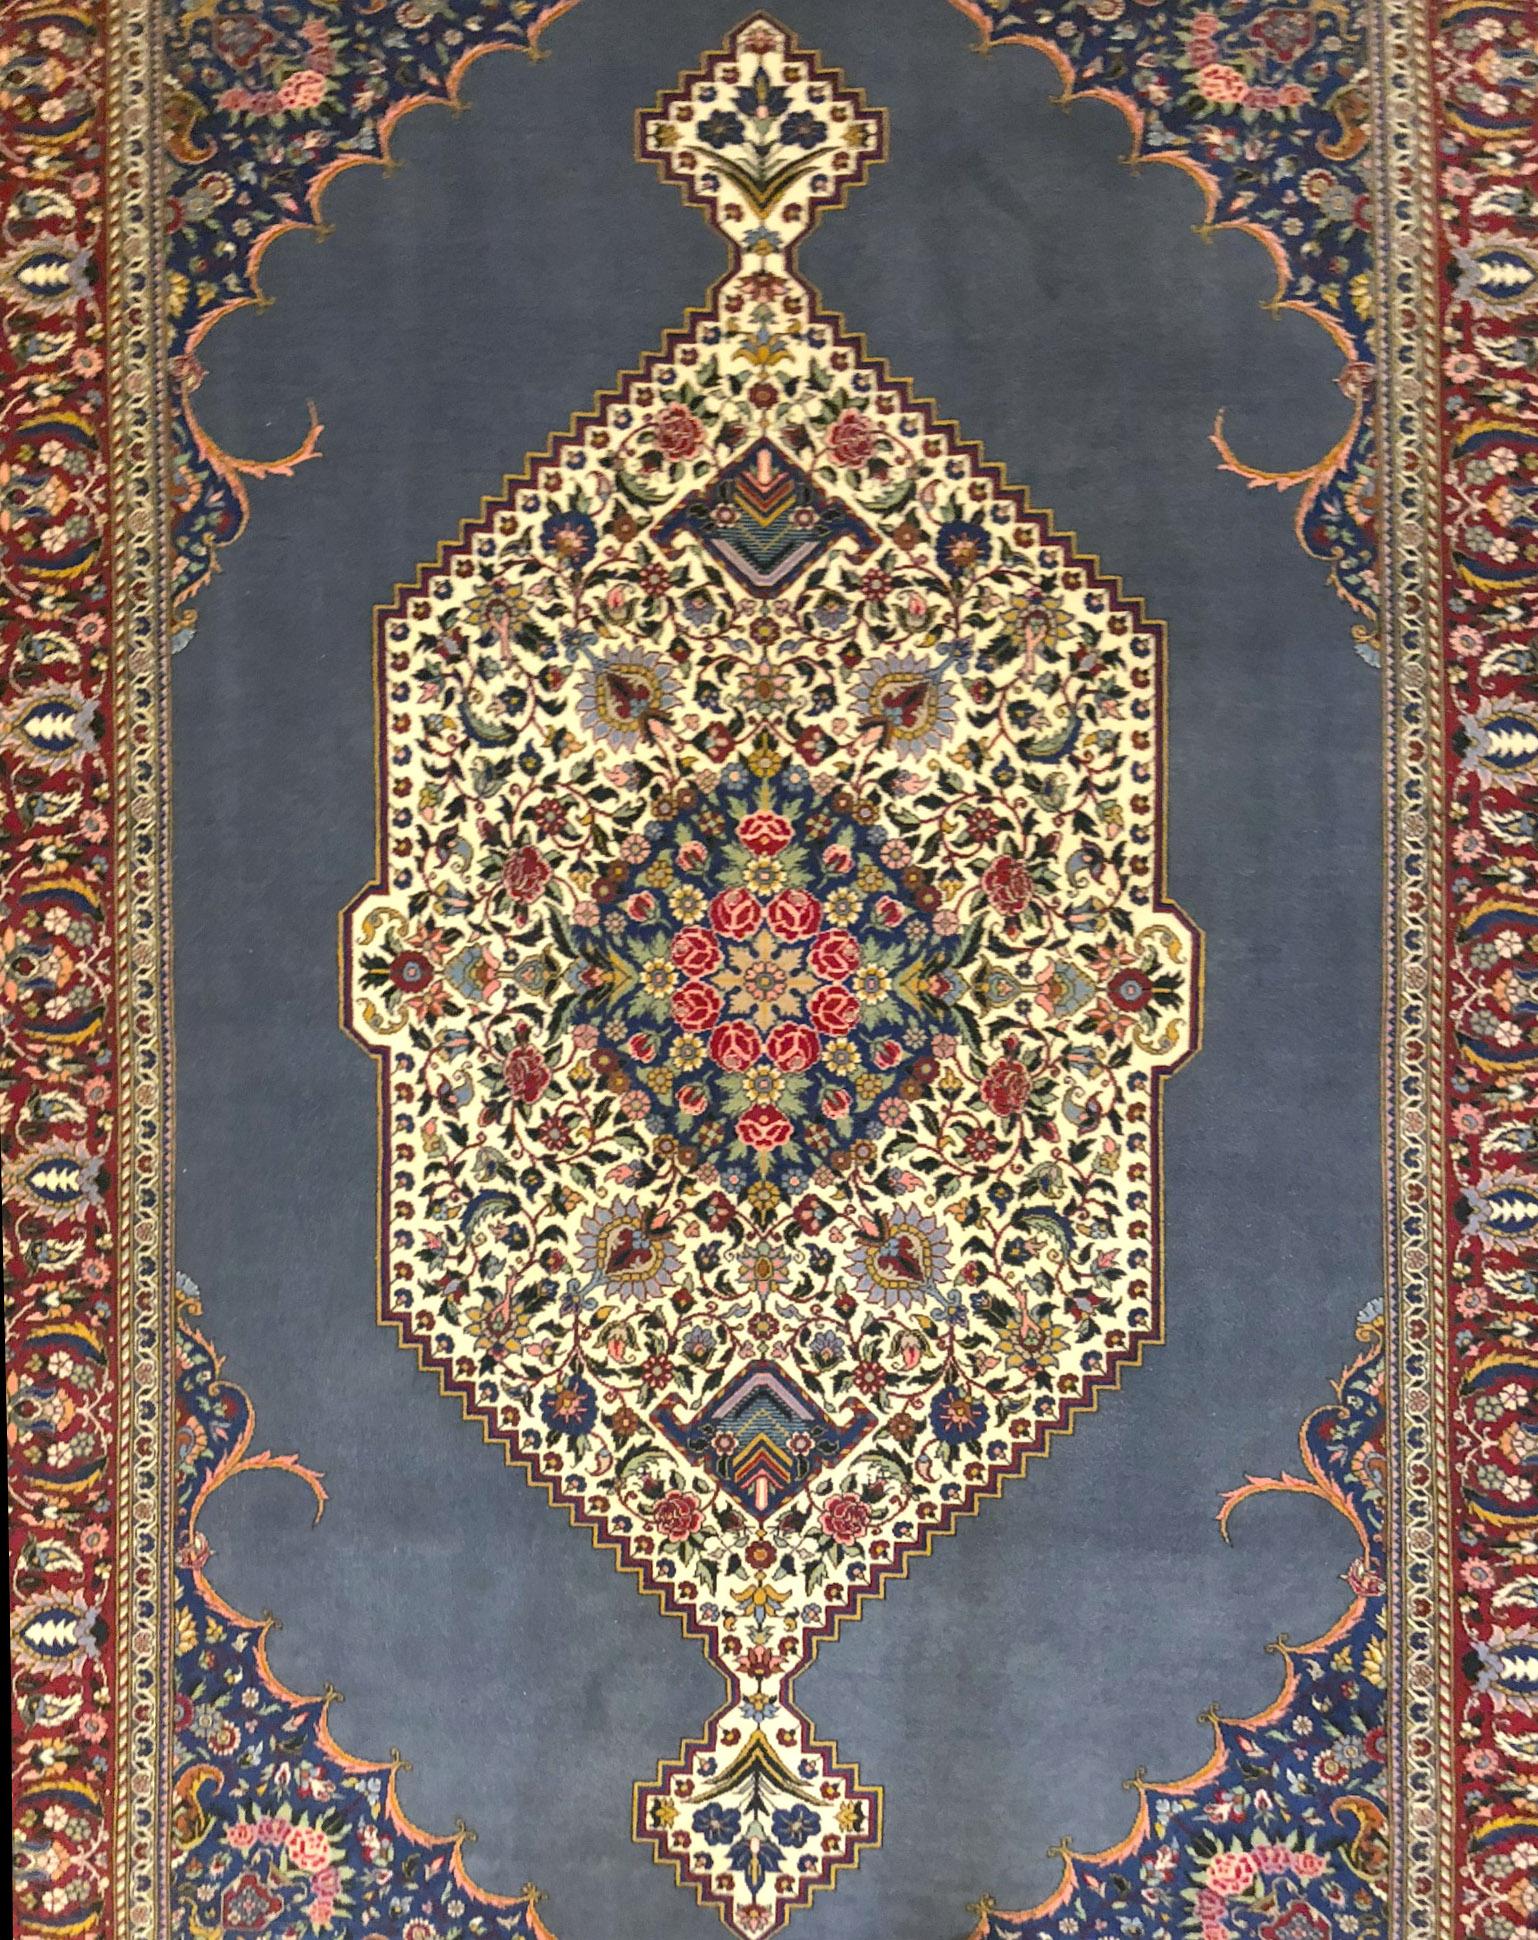 This Persian handmade rug has wool pile with cotton foundation. This beautiful rug is from Iran, Tabriz and the design is floral with open field medallion. The base color is blue and border color is dark red.